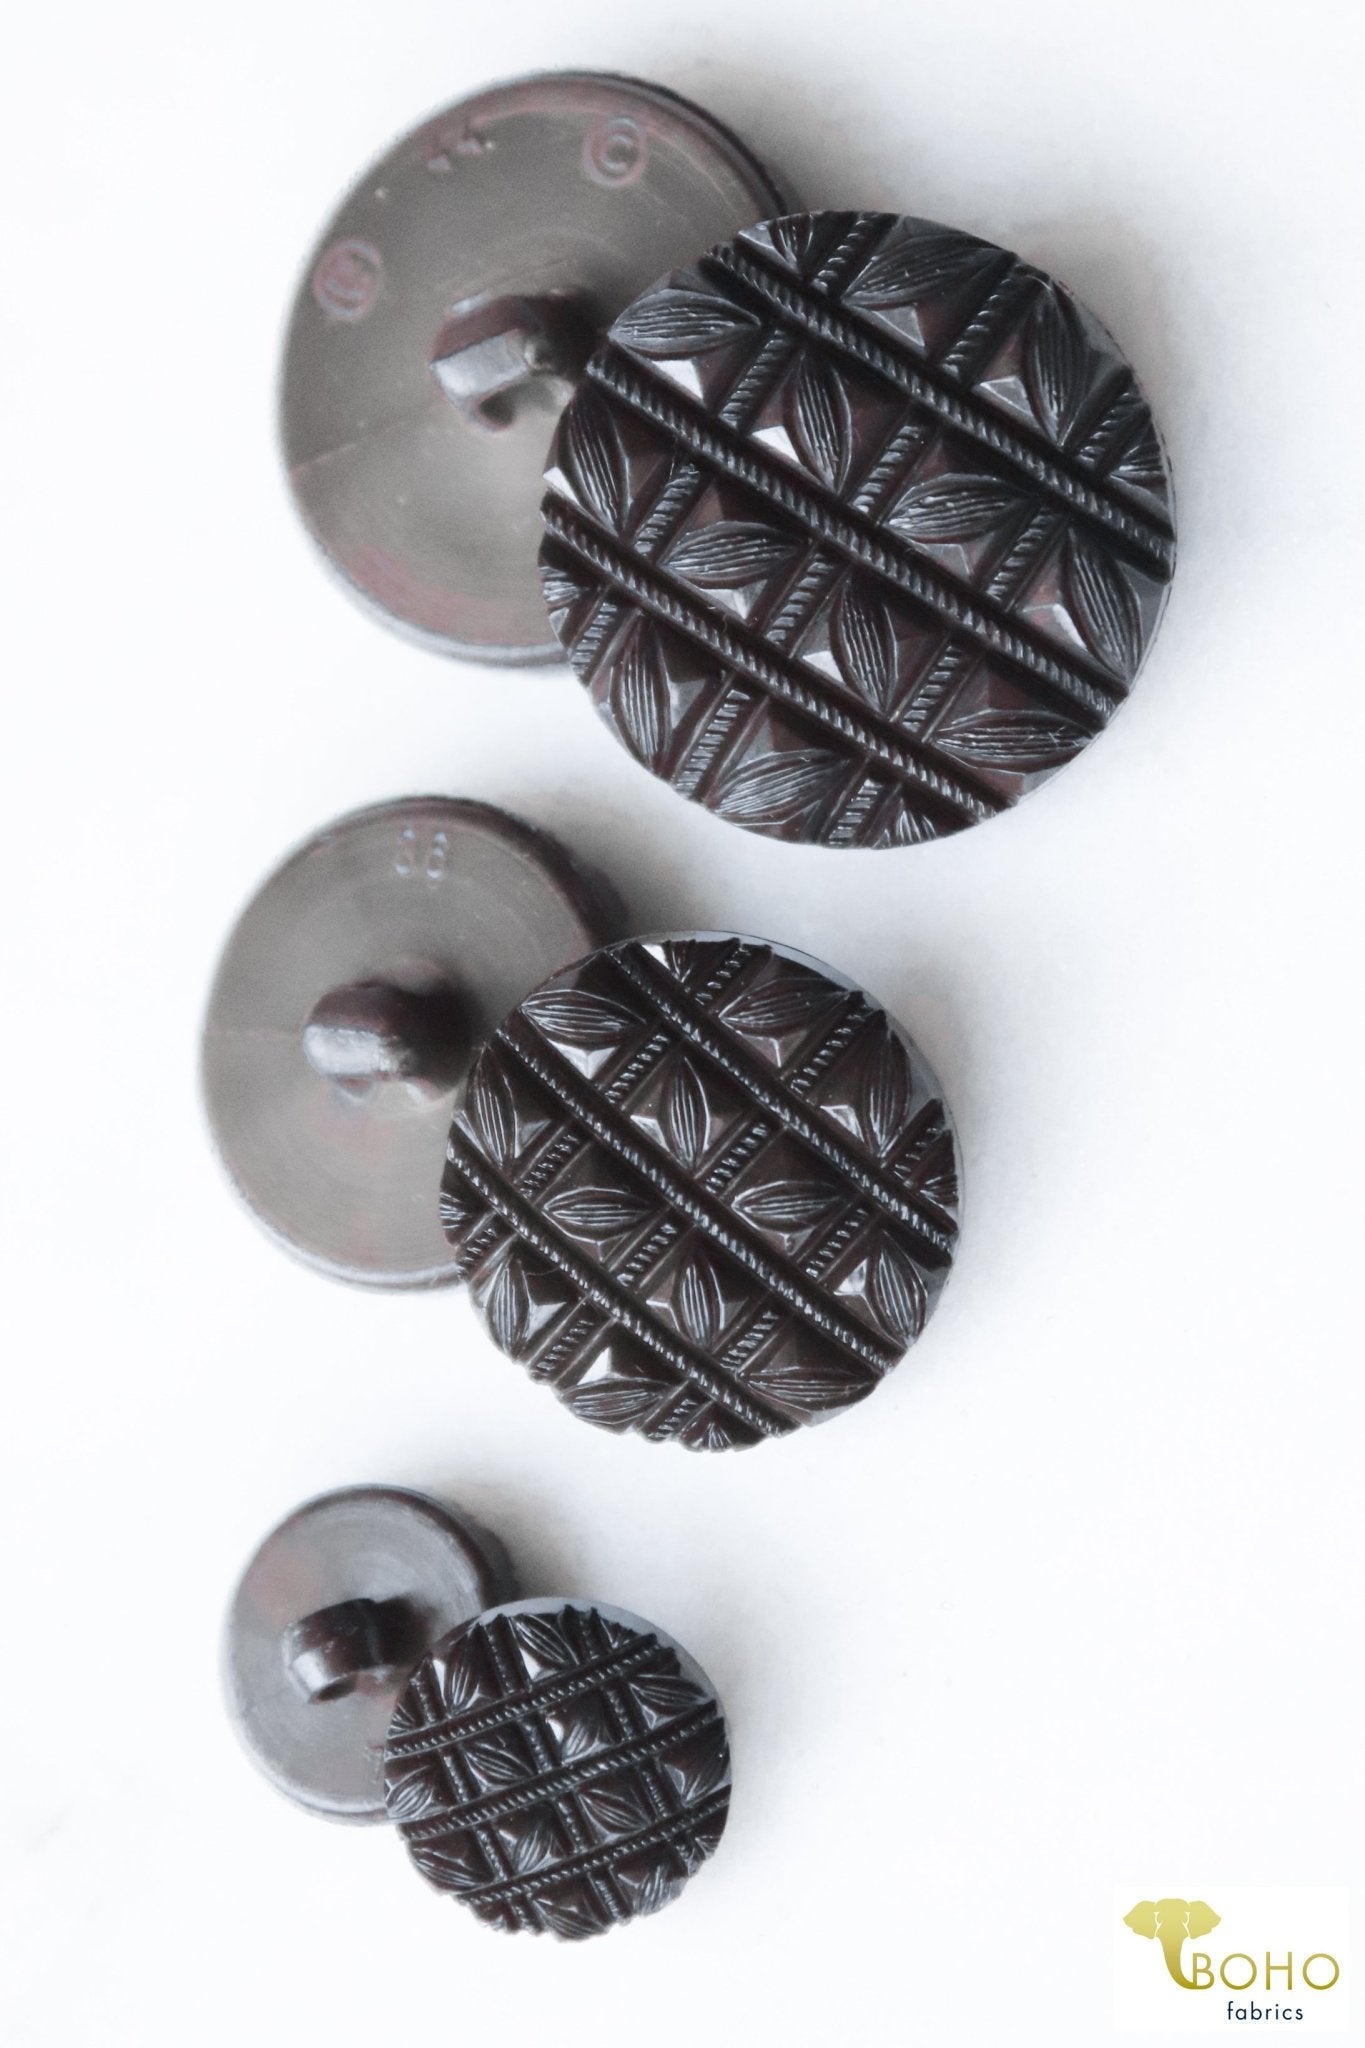 Etched Hepburn, Shank Buttons in Charcoal Available in 15mm, 23mm, 28mm - Boho Fabrics